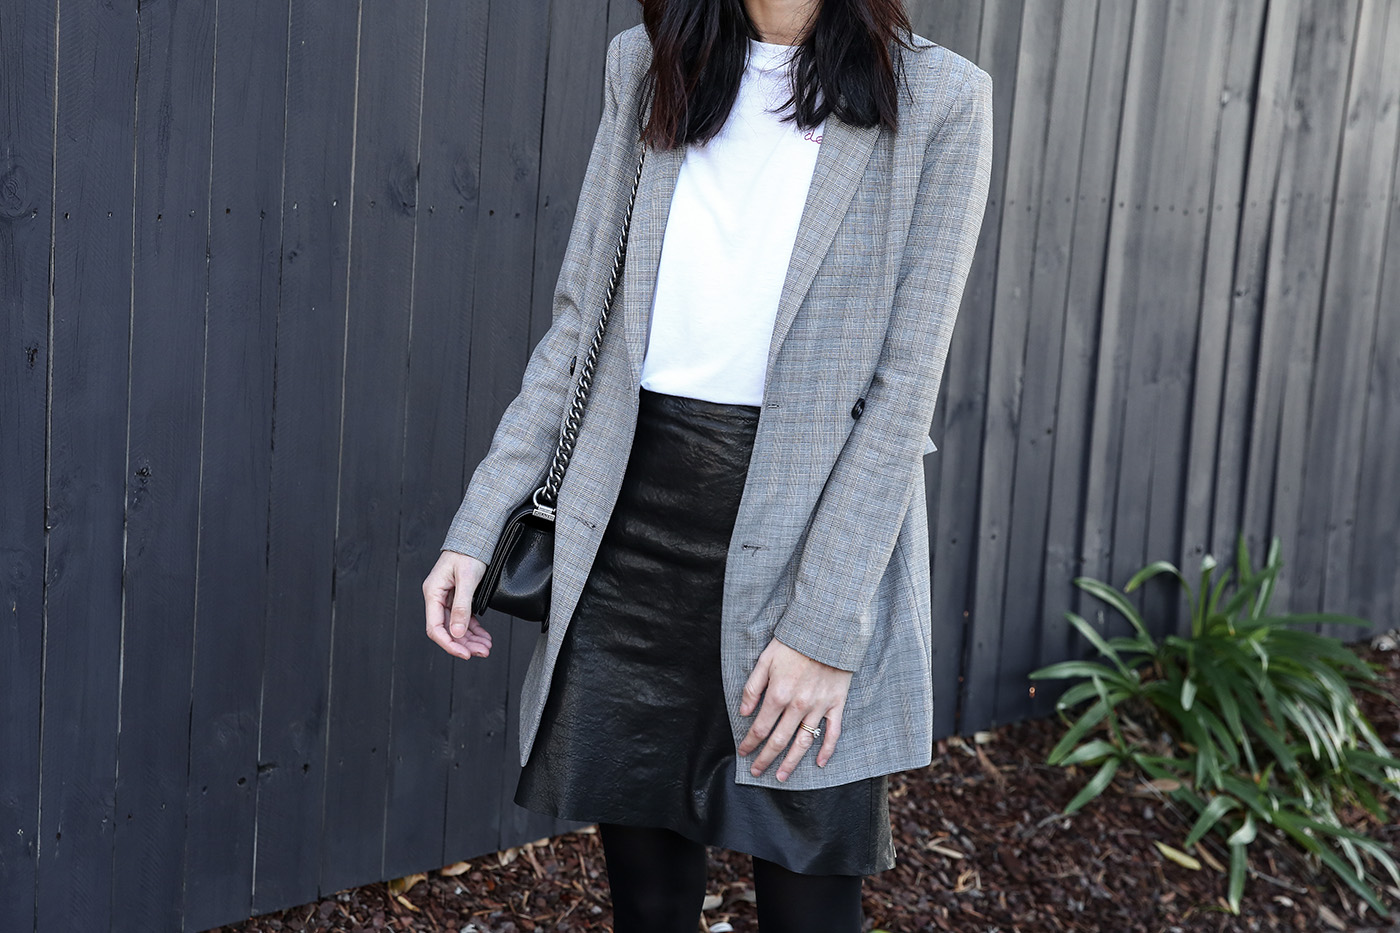 Talking about Wardrobe Heroes, the Check Blazer